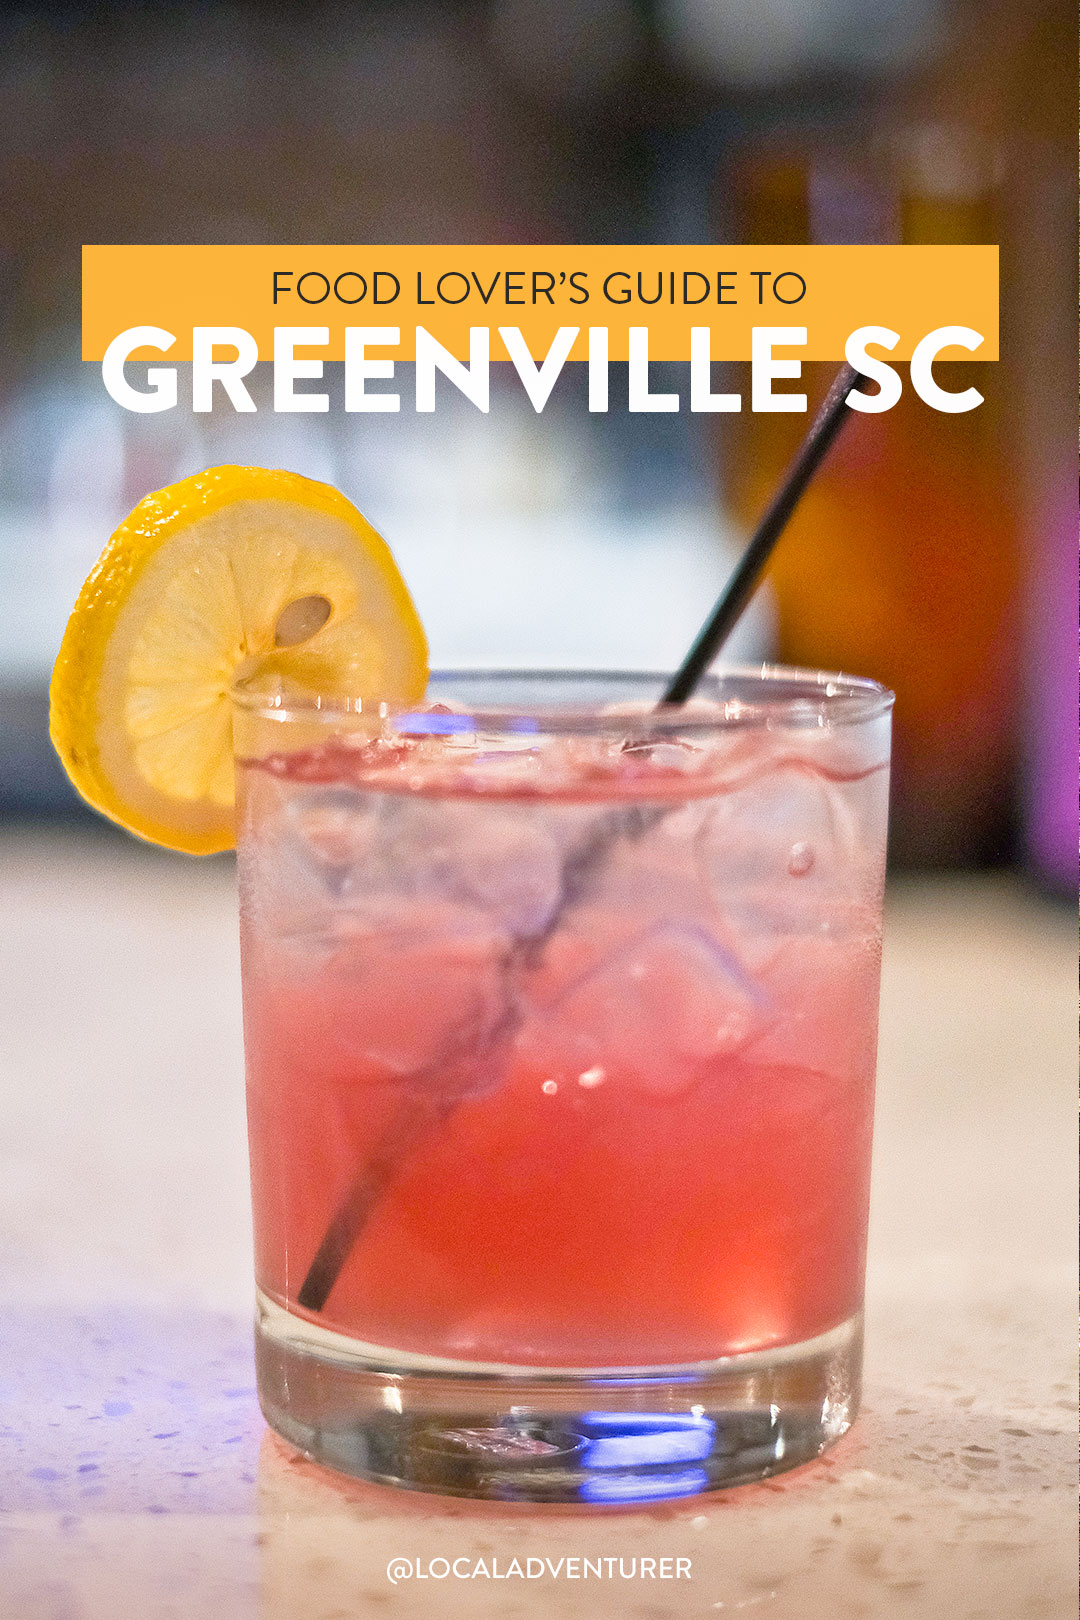 13 Absolutely Amazing Places to Eat in Greenville SC